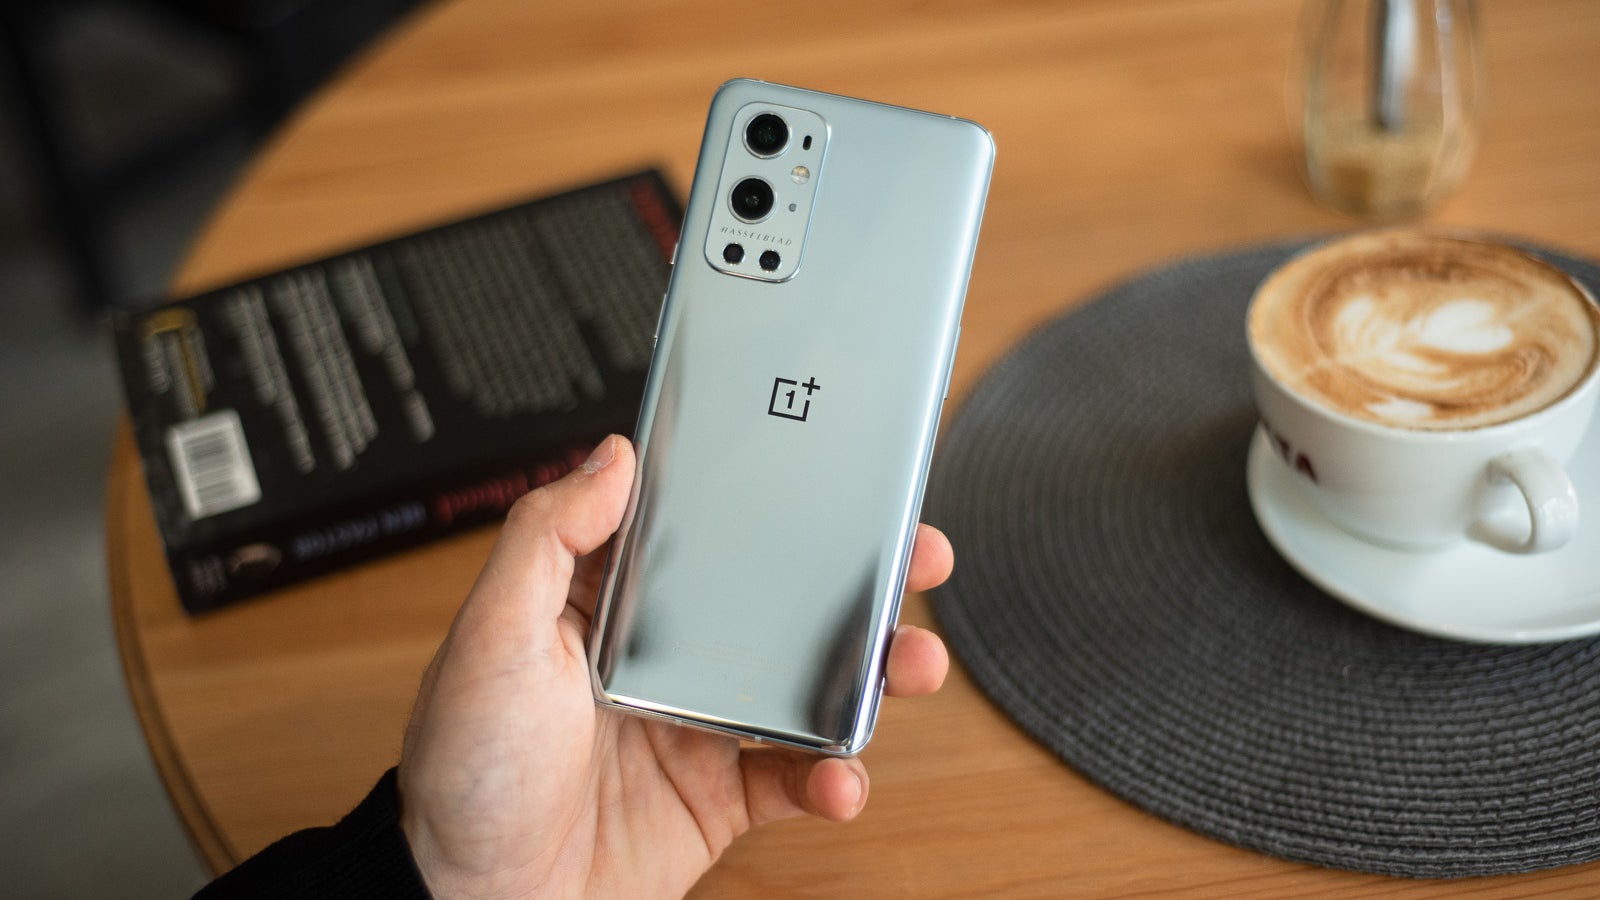 oneplus geekbench over cheating allegations